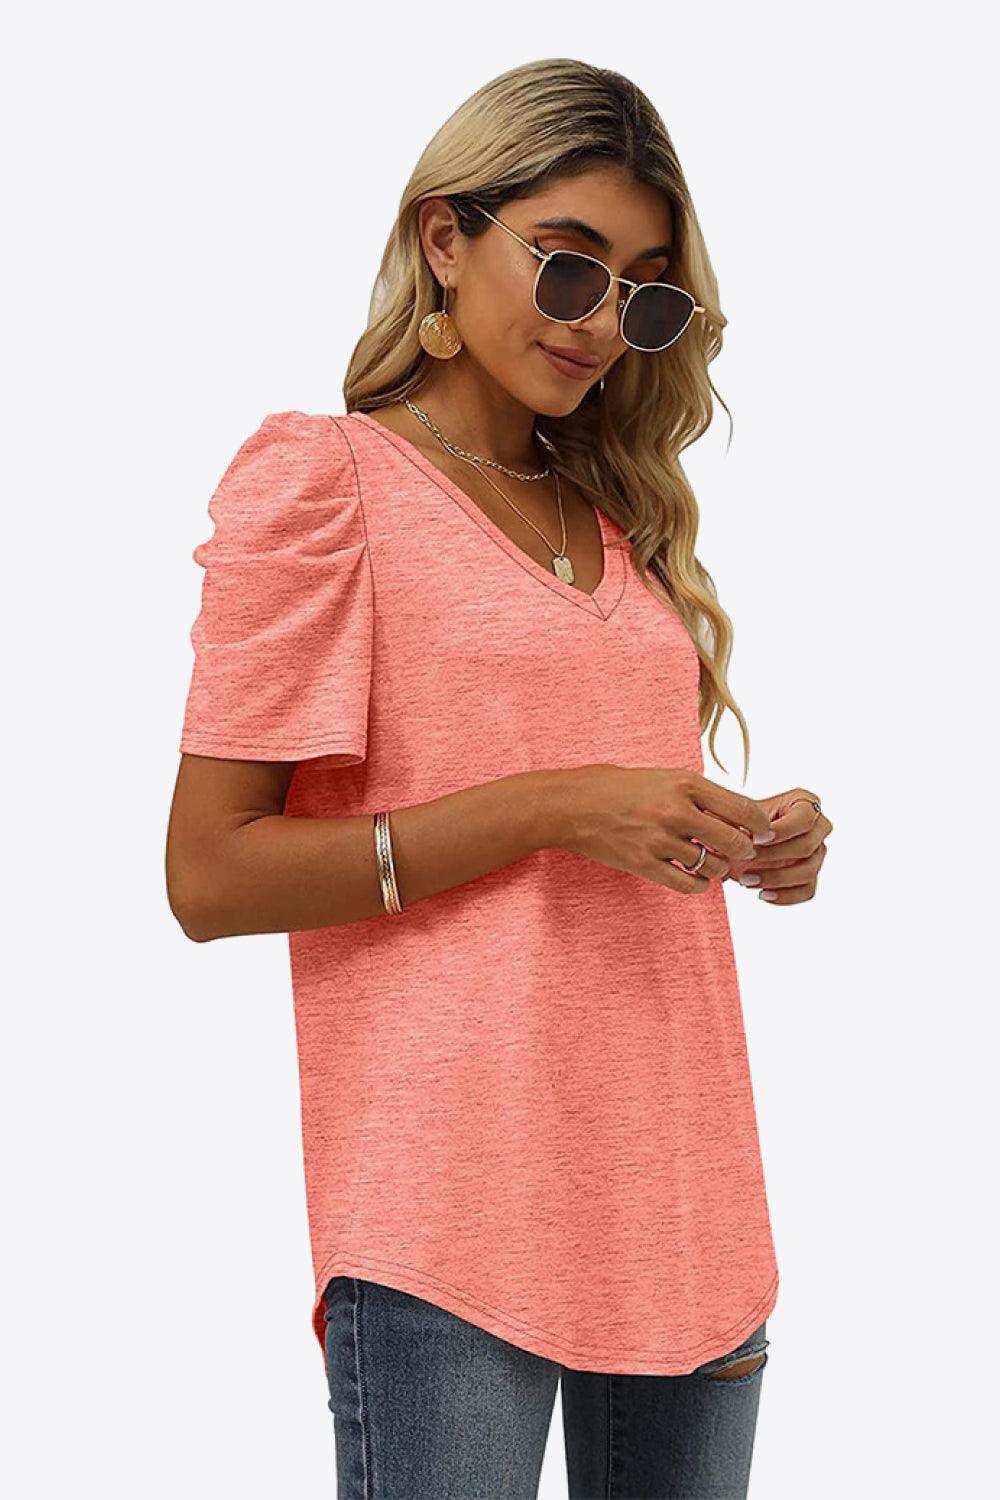 V-Neck Puff Sleeve Tee - Crazy Like a Daisy Boutique